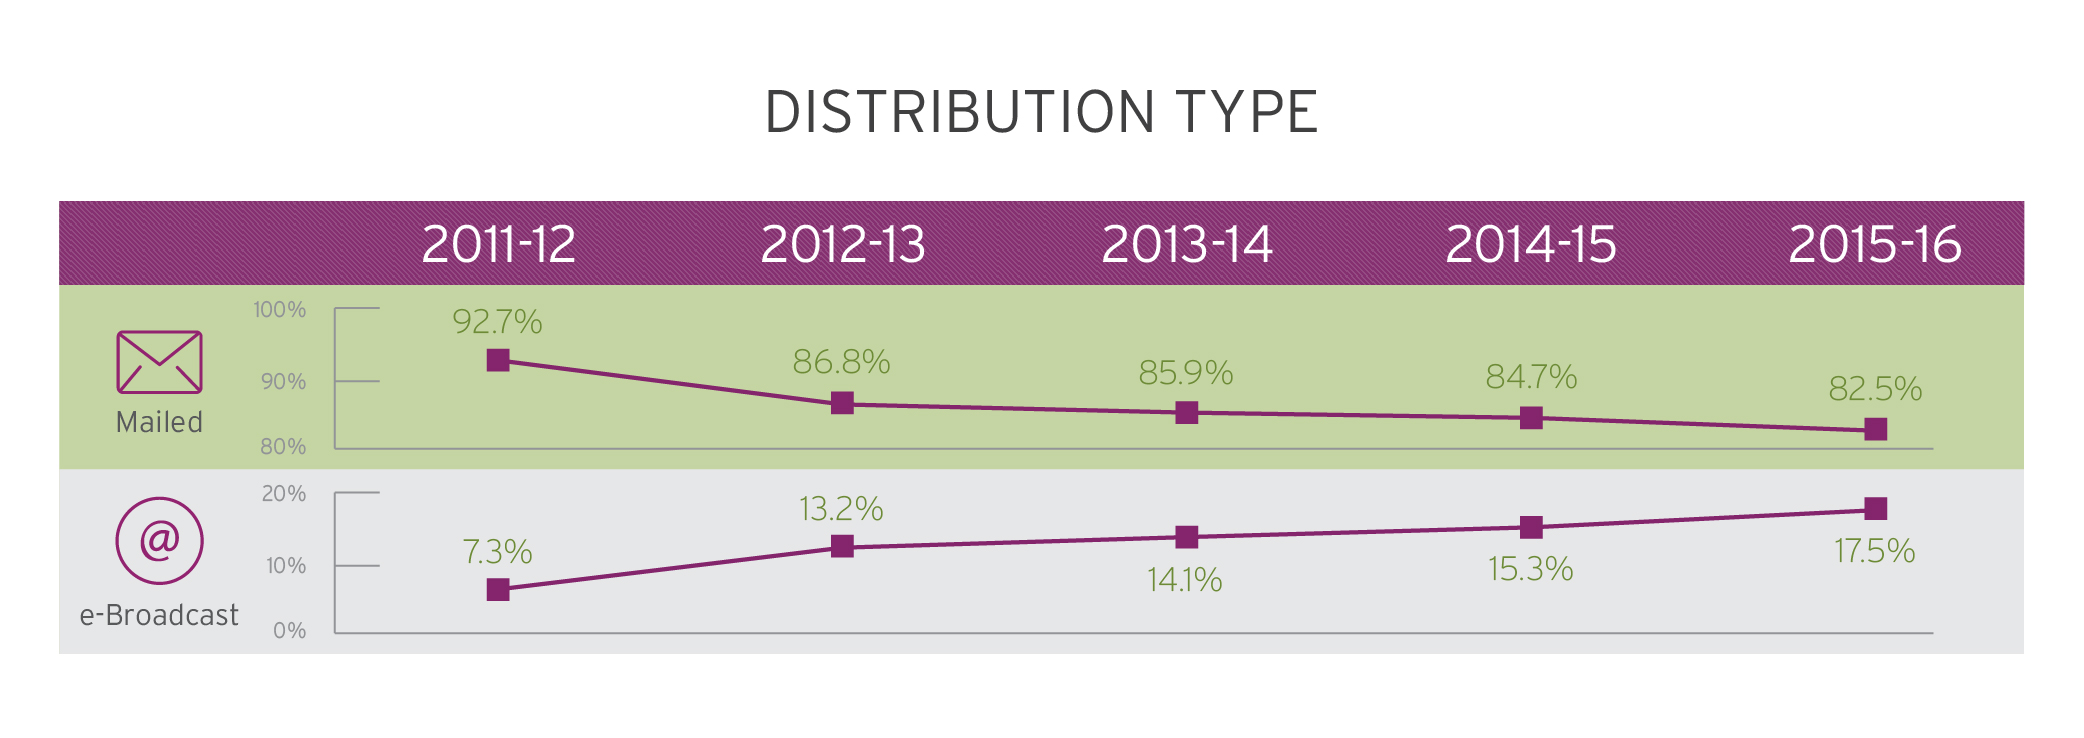 AGM Report: Distribution Type